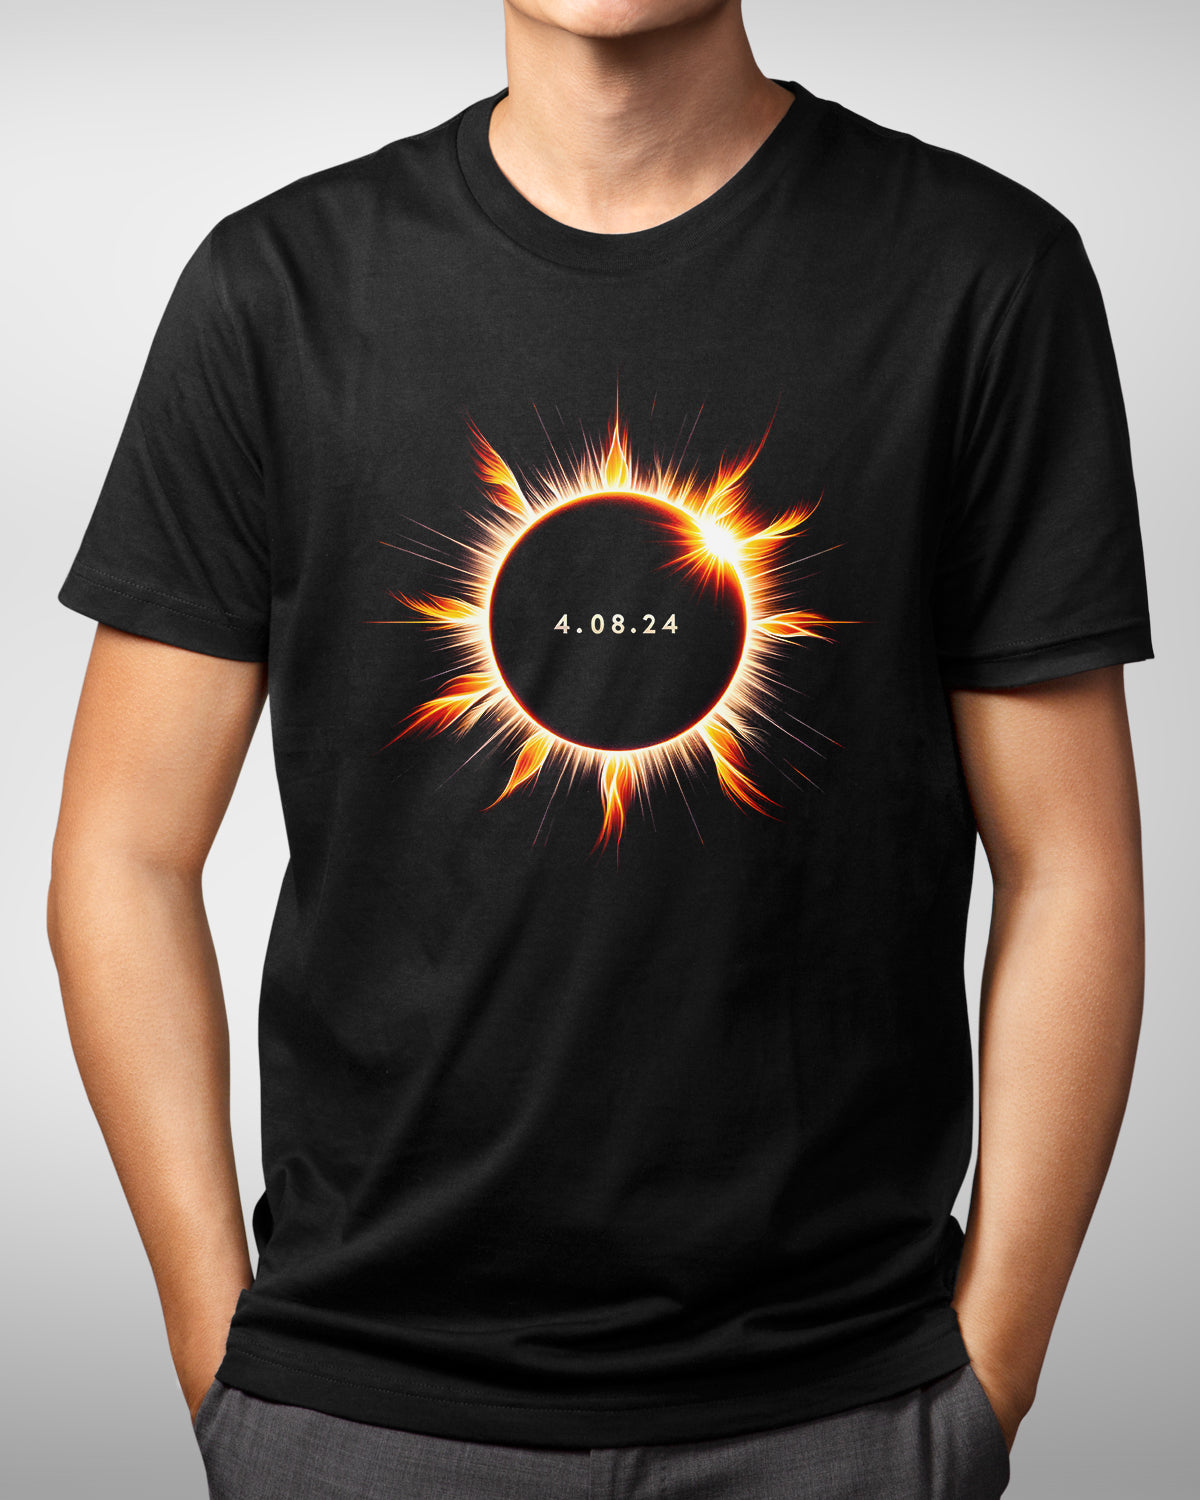 2024 Solar Eclipse Shirt, American Totality Tee, 4.08.24 Eclipse Gift, Spring Solar Event Souvenir, Eclipse Viewing Party